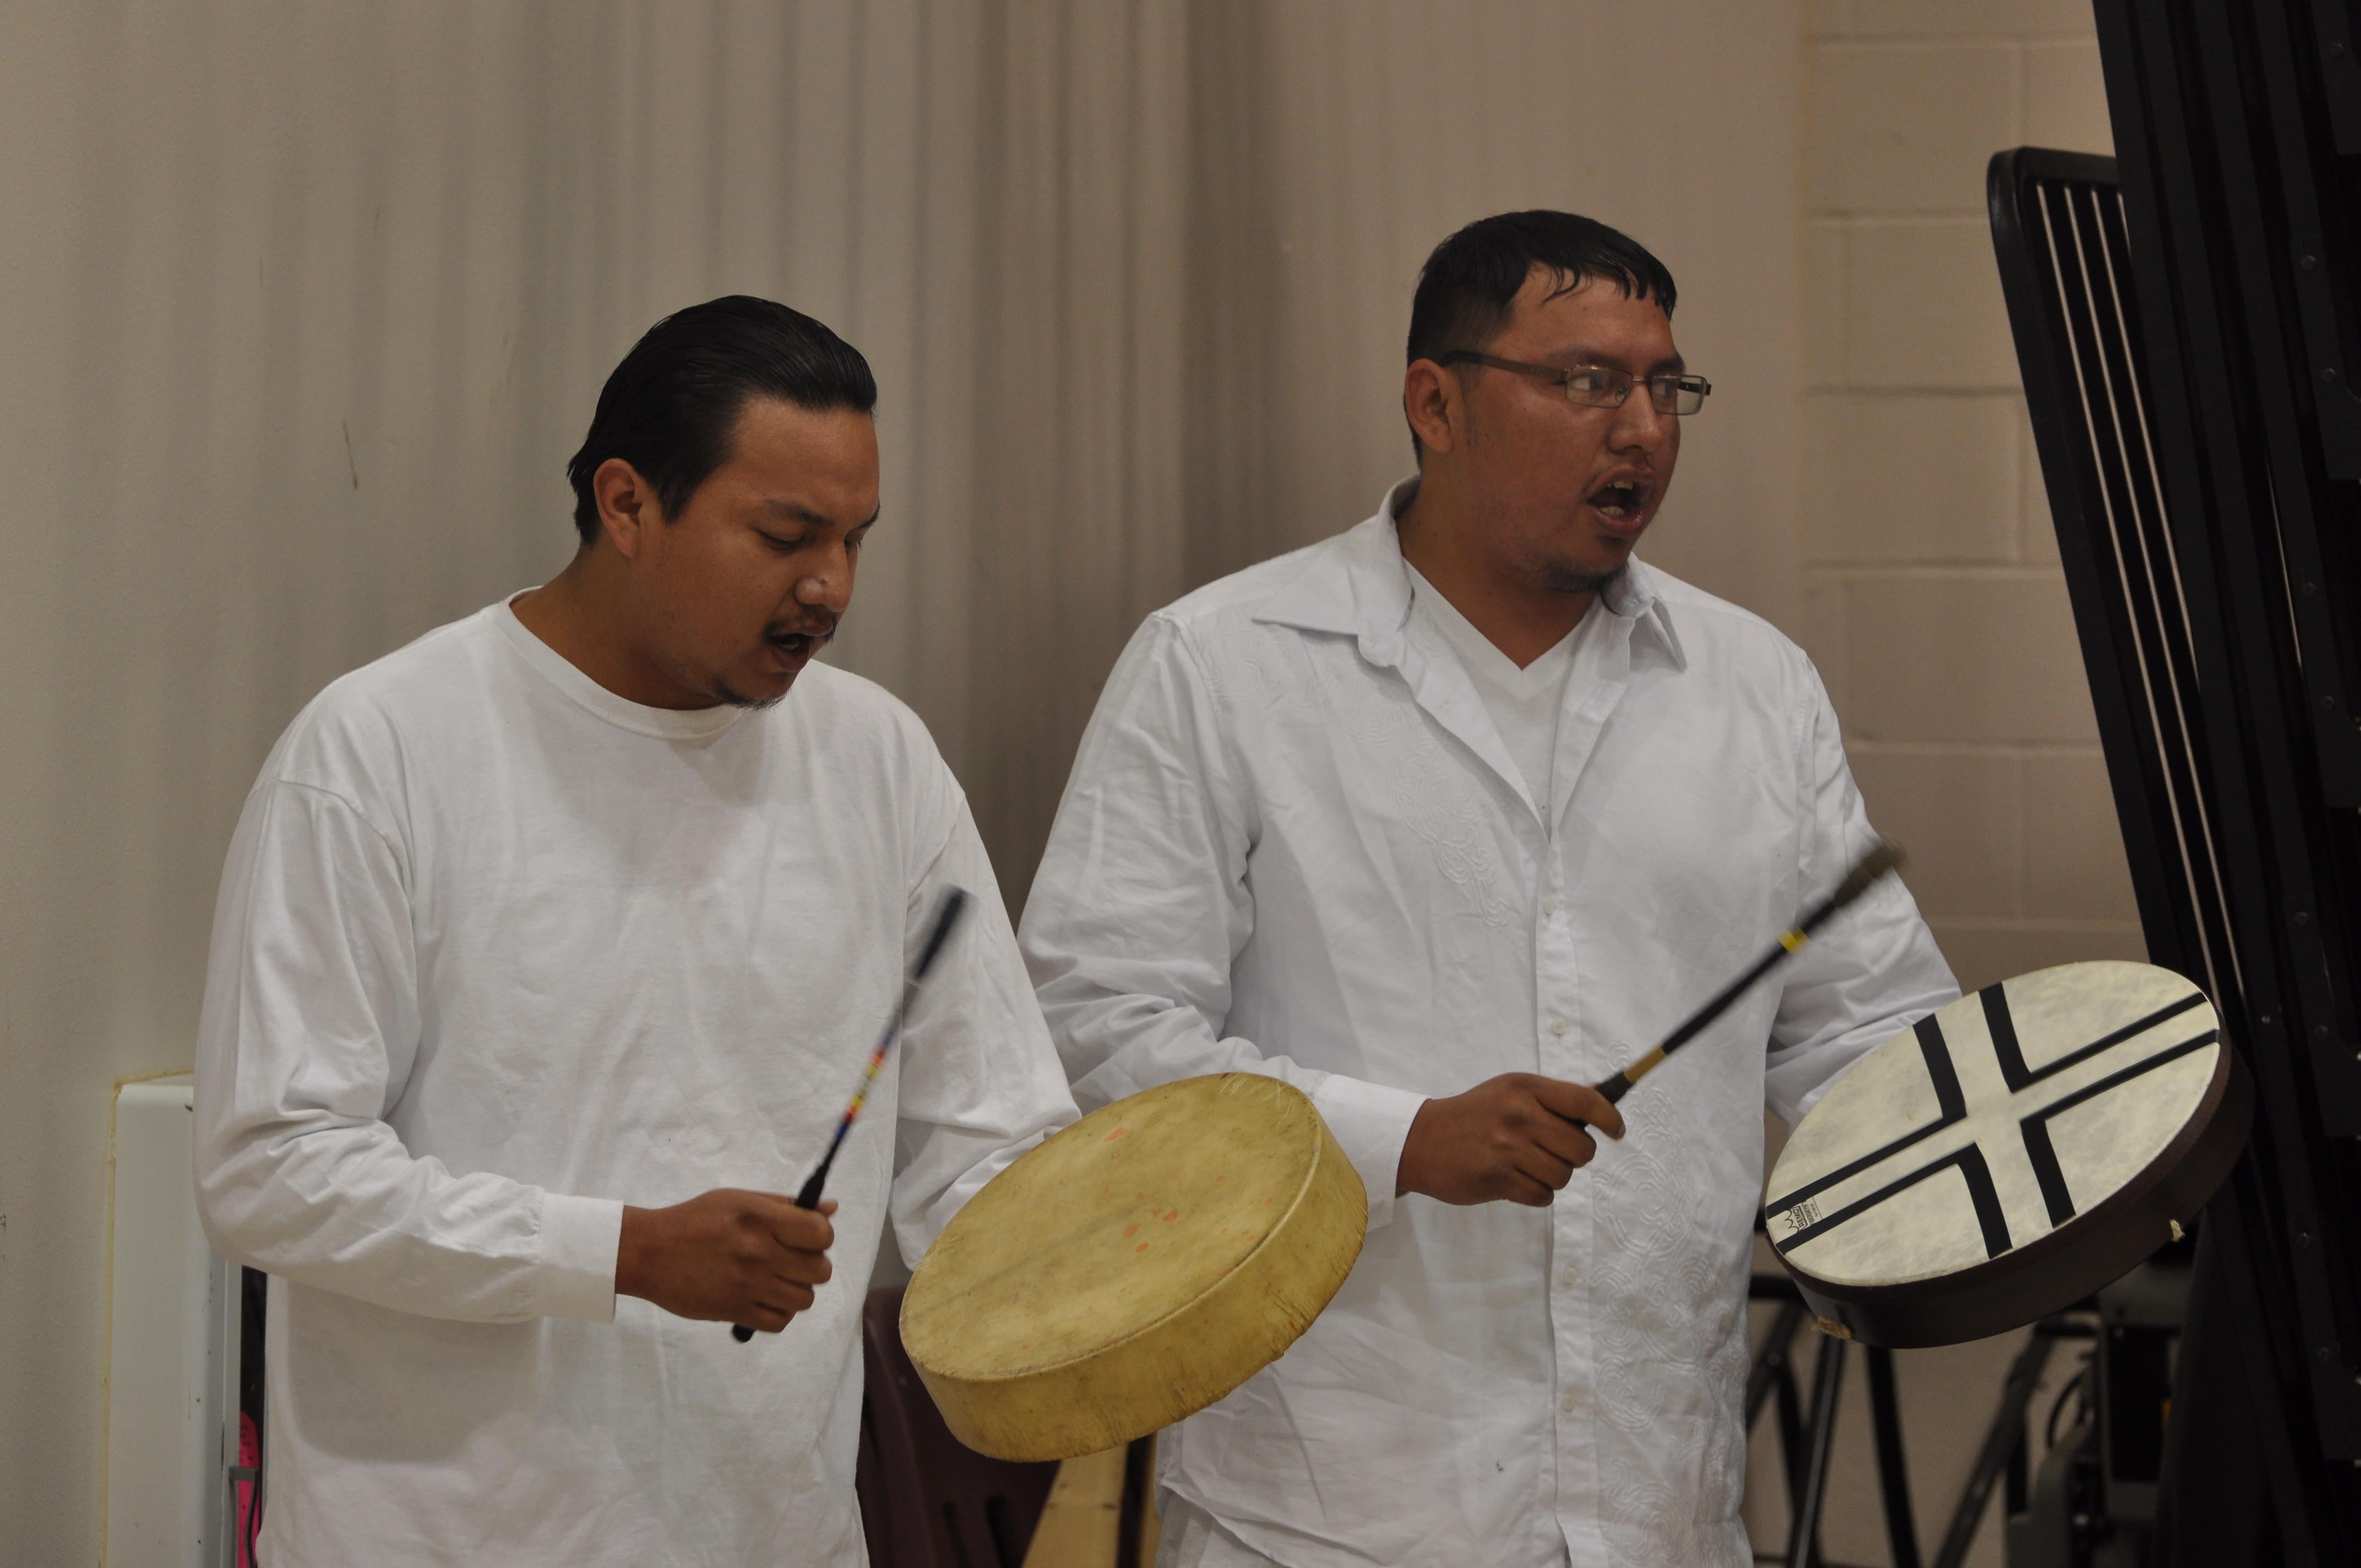 Drummers perform at the opening of the 2nd Annual U.S. Attorney's Tribal Consultation Conference on Thursday, April 26, 2012.